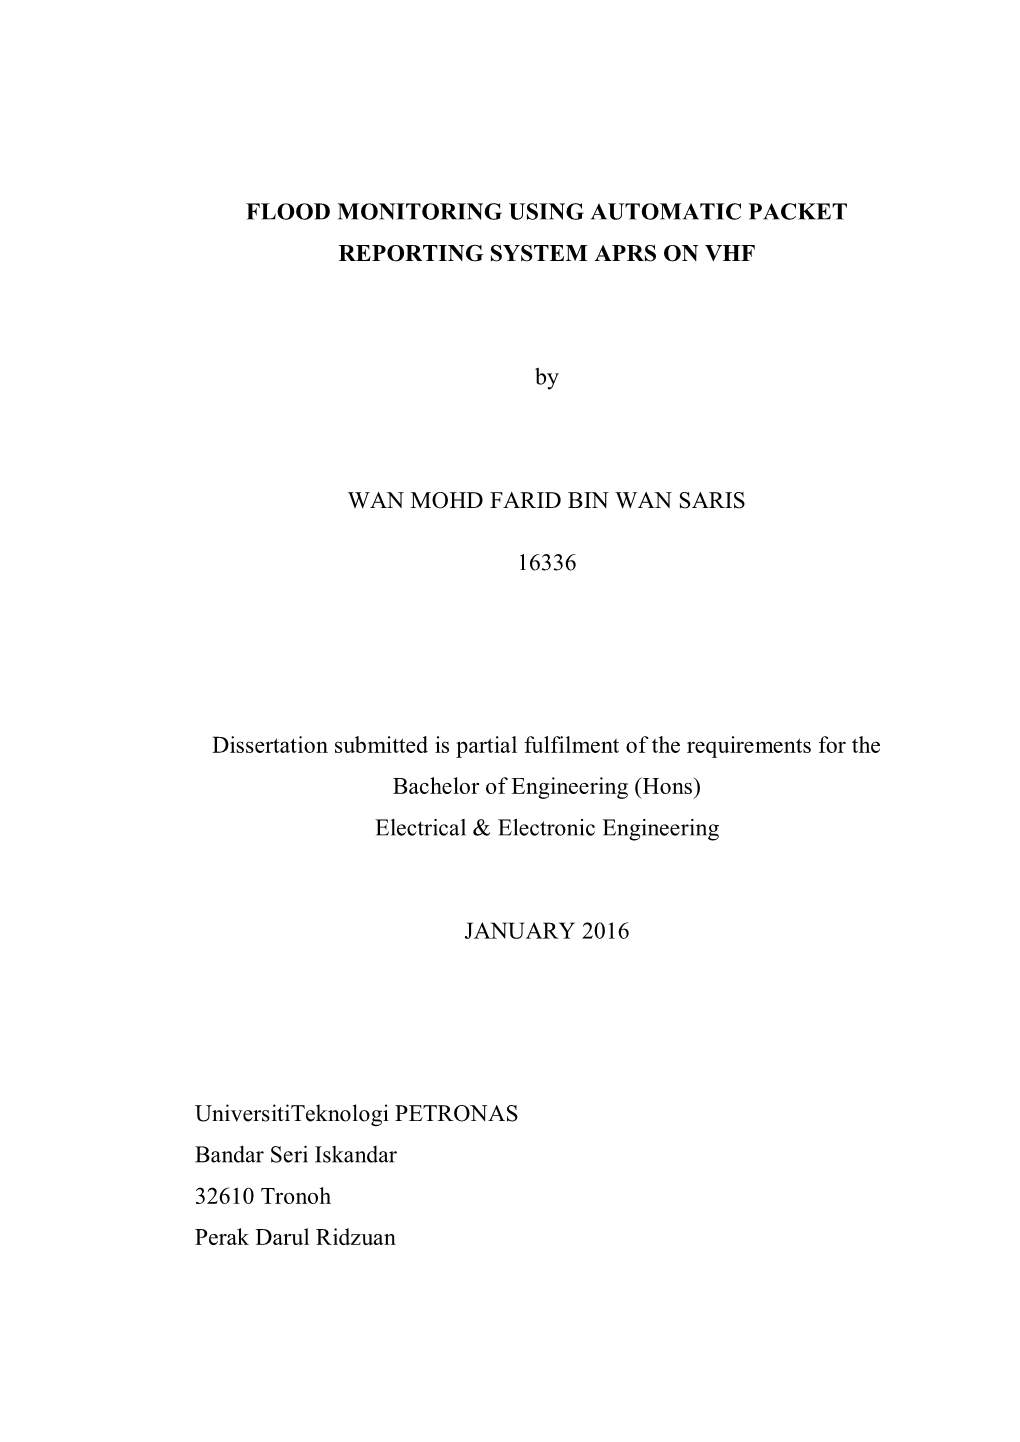 FLOOD MONITORING USING AUTOMATIC PACKET REPORTING SYSTEM APRS on VHF by WAN MOHD FARID BIN WAN SARIS 16336 Dissertation Submitte